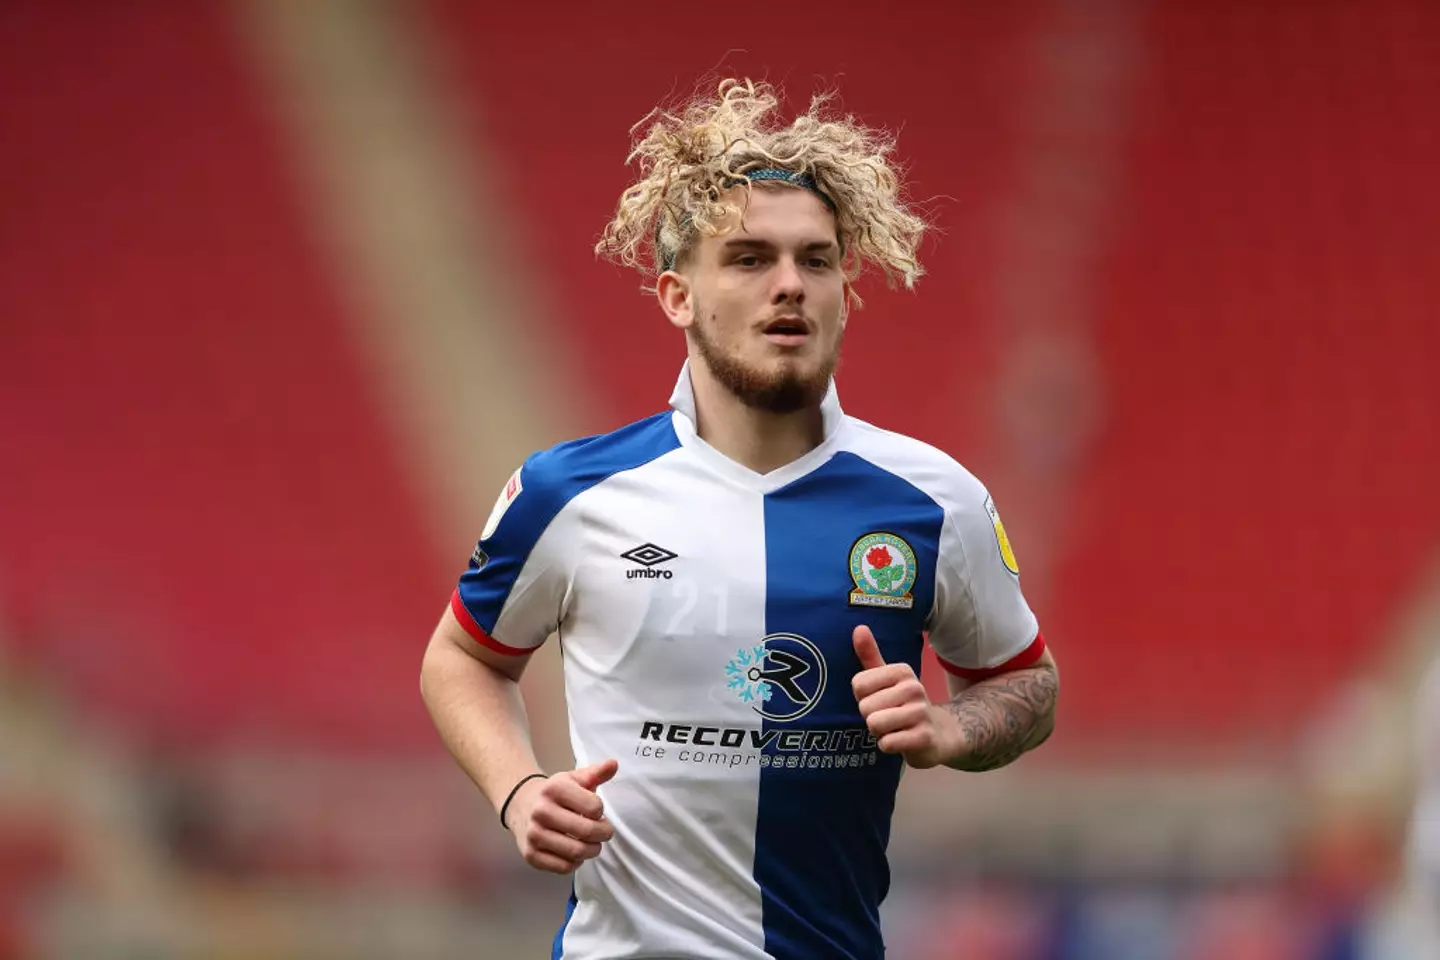 Elliott wore his collar up while playing for Blackburn (Image: Getty)